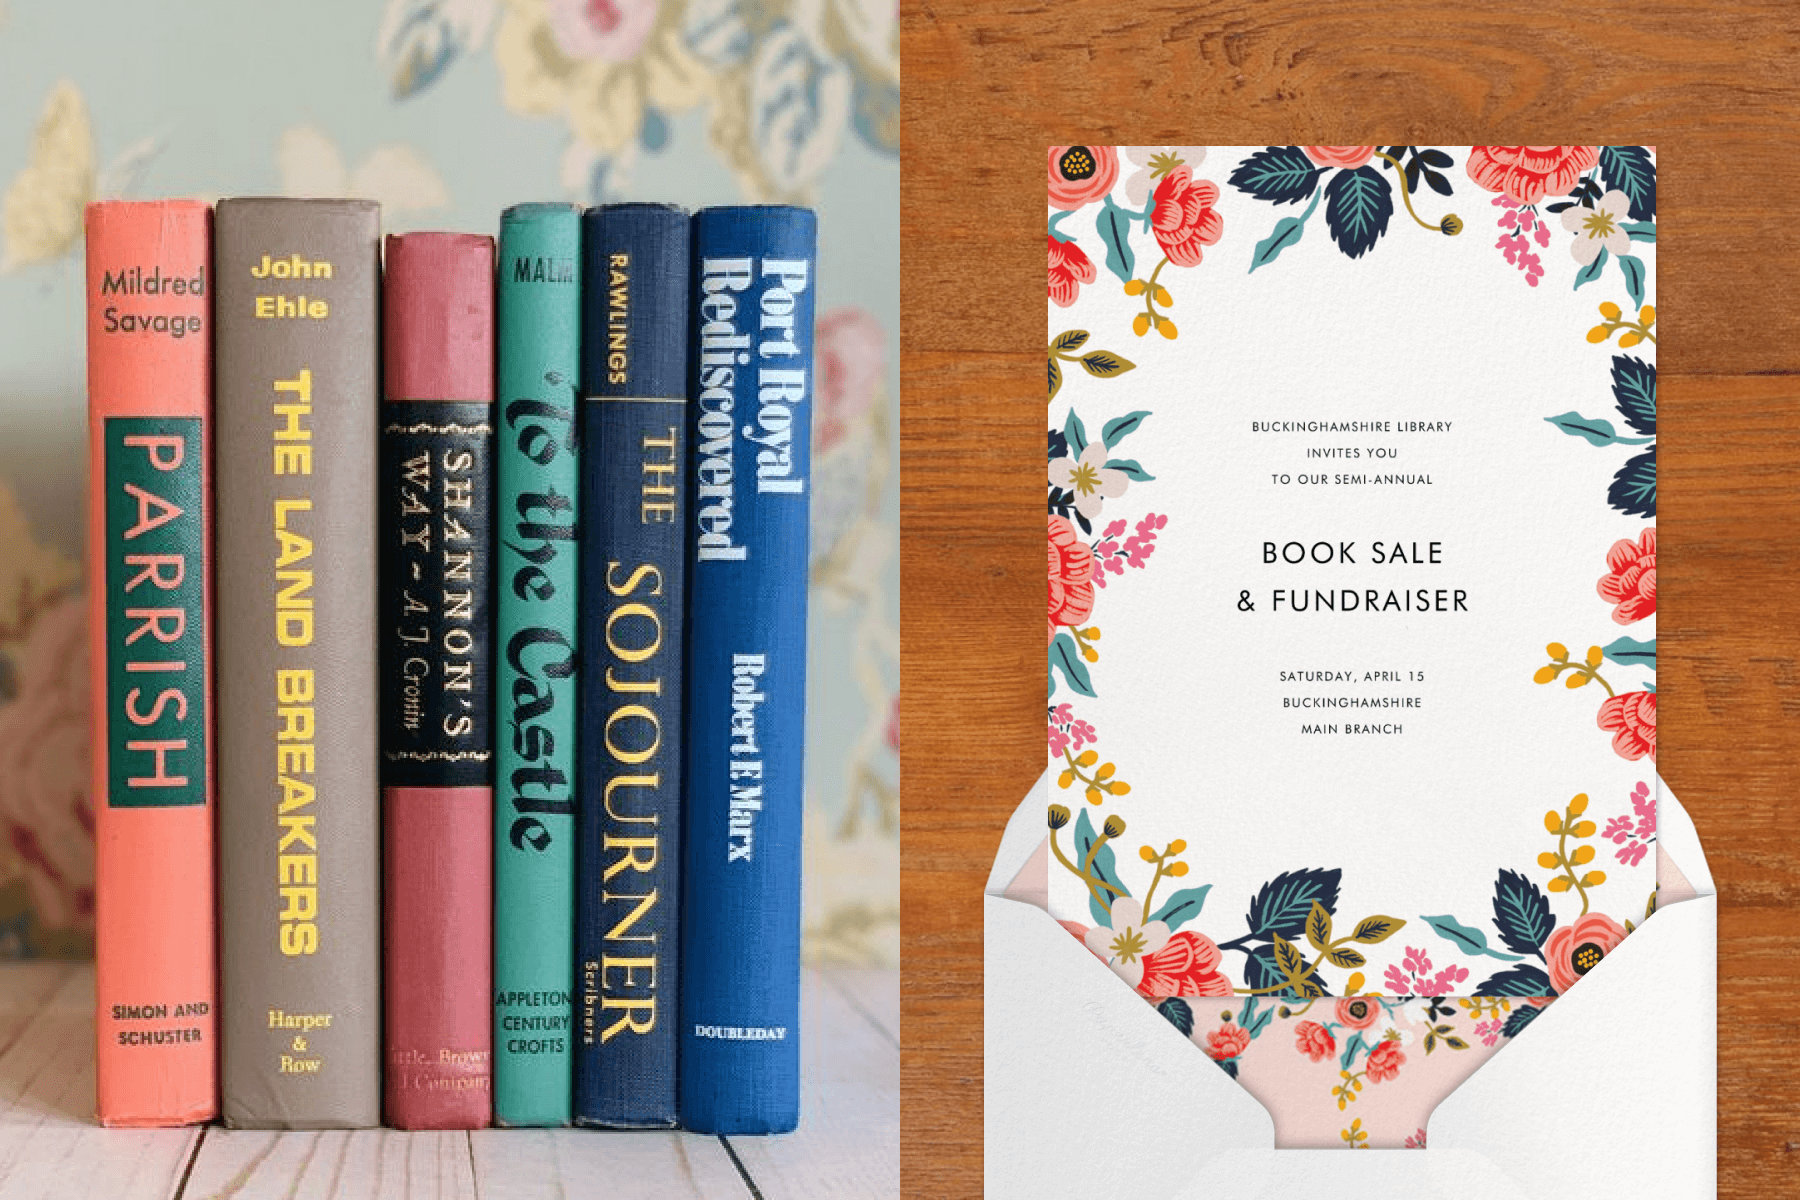 left: Six colorful hardcover books stand in a row. Right: A book sale and fundraiser invitation with colorful florals illustrated around the border.